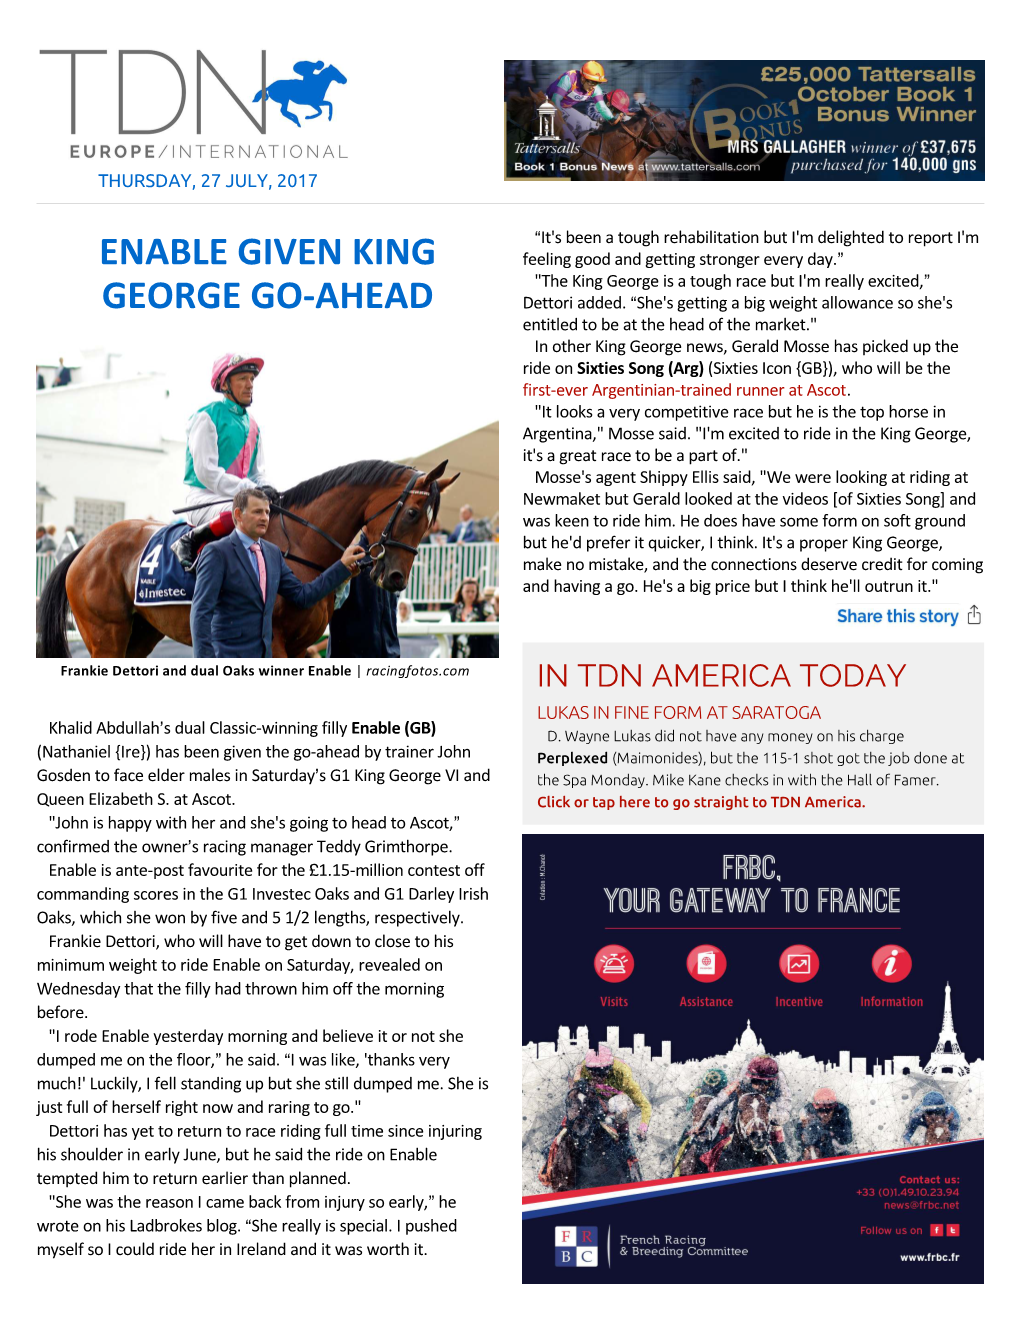 Enable Given King George Go-Ahead